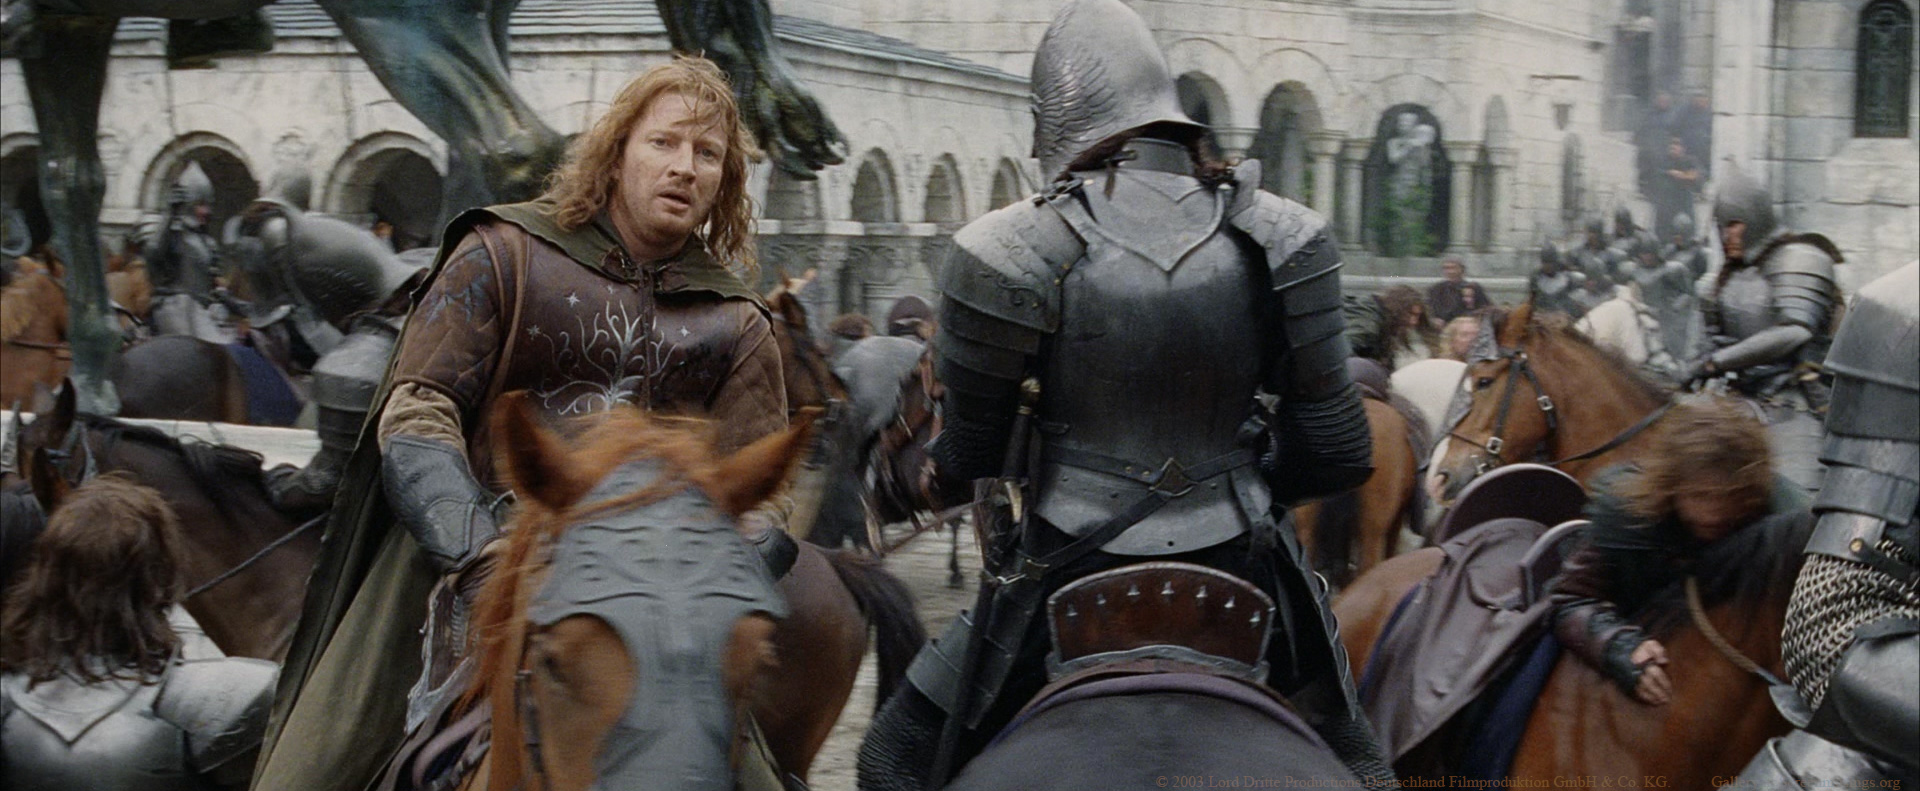 Sean Bean in The Lord of the Rings: The Return of the King